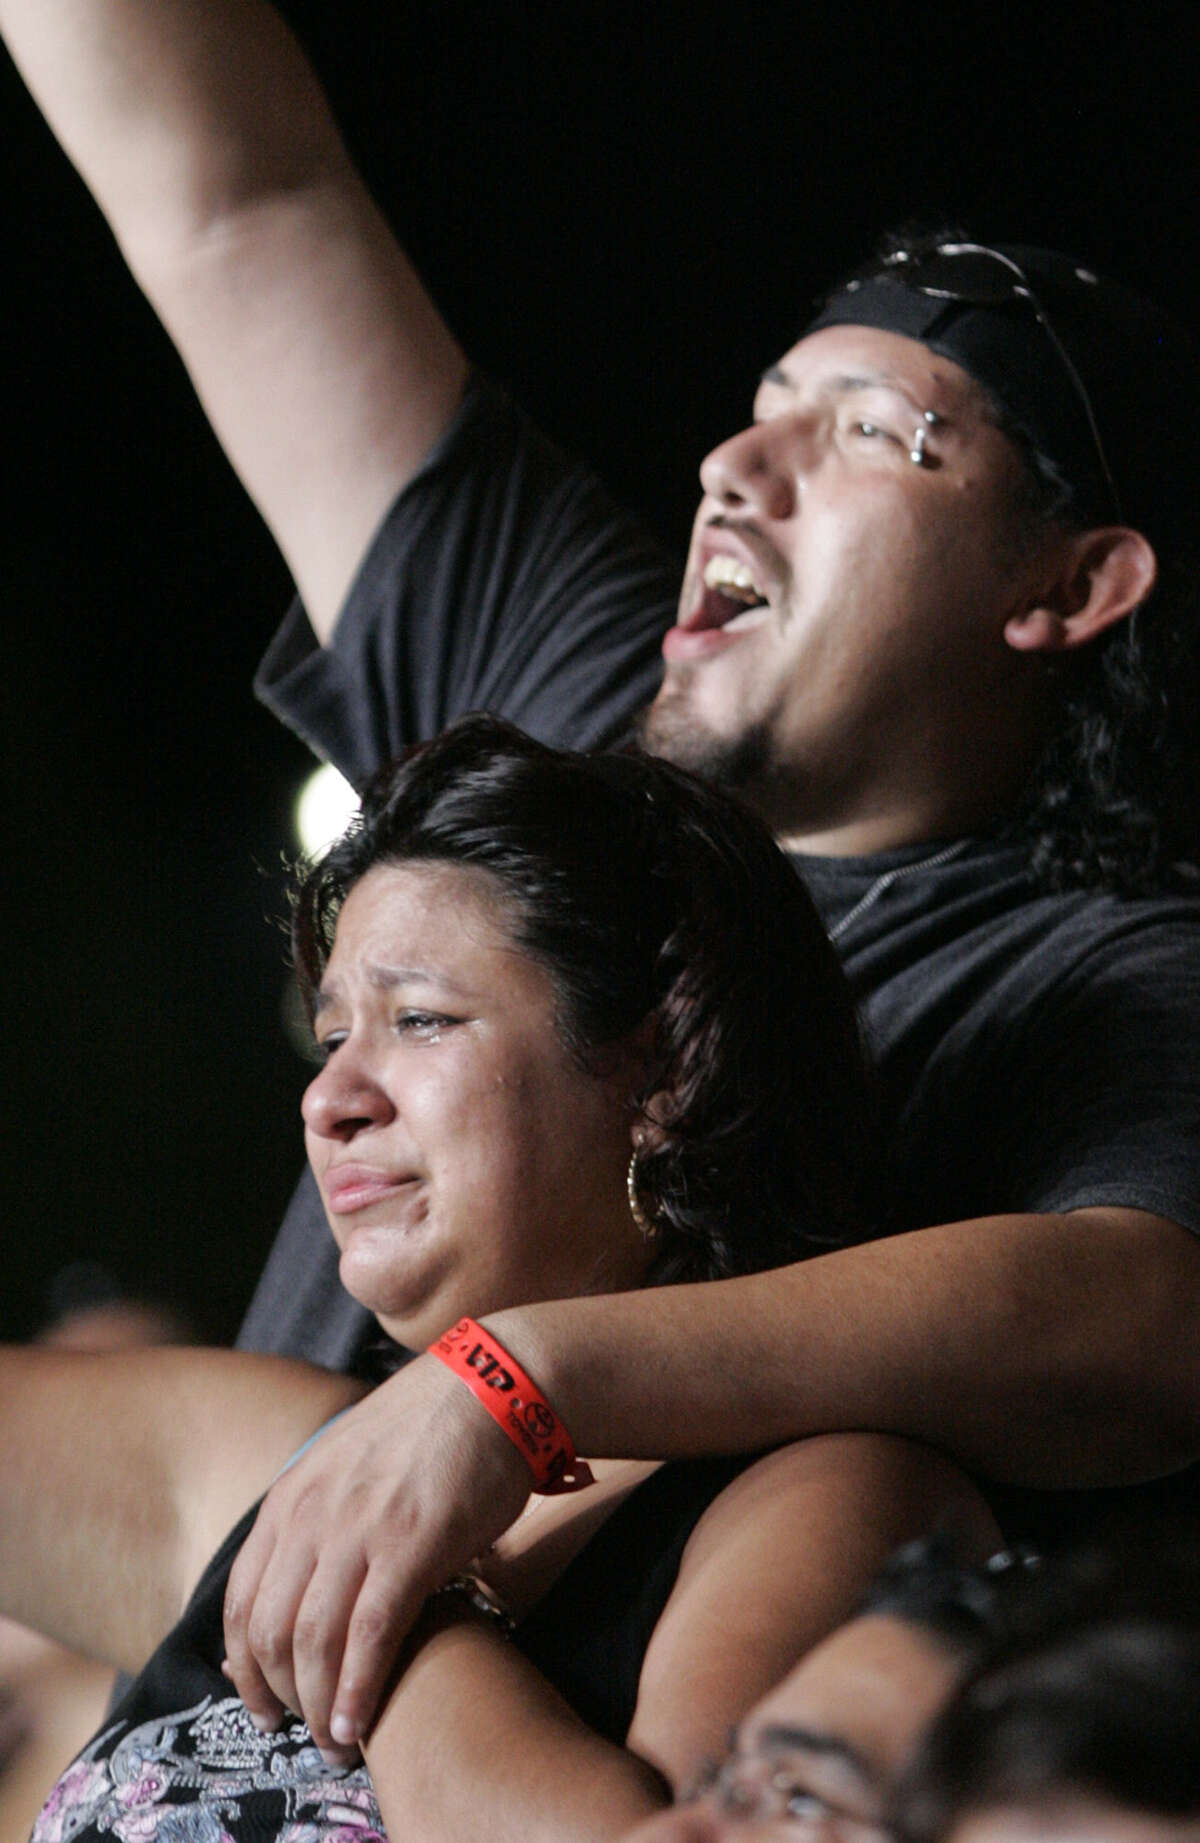 Corina and Rober Suarez cheer durin the Ozzy Osbourne performance during Ozzfest at the Verizon Amphitheater in San Antonio, Texas on Saturday, August 4, 2007. (ALICIA WAGNER CALZADA/ SPECIAL TO 210SA)